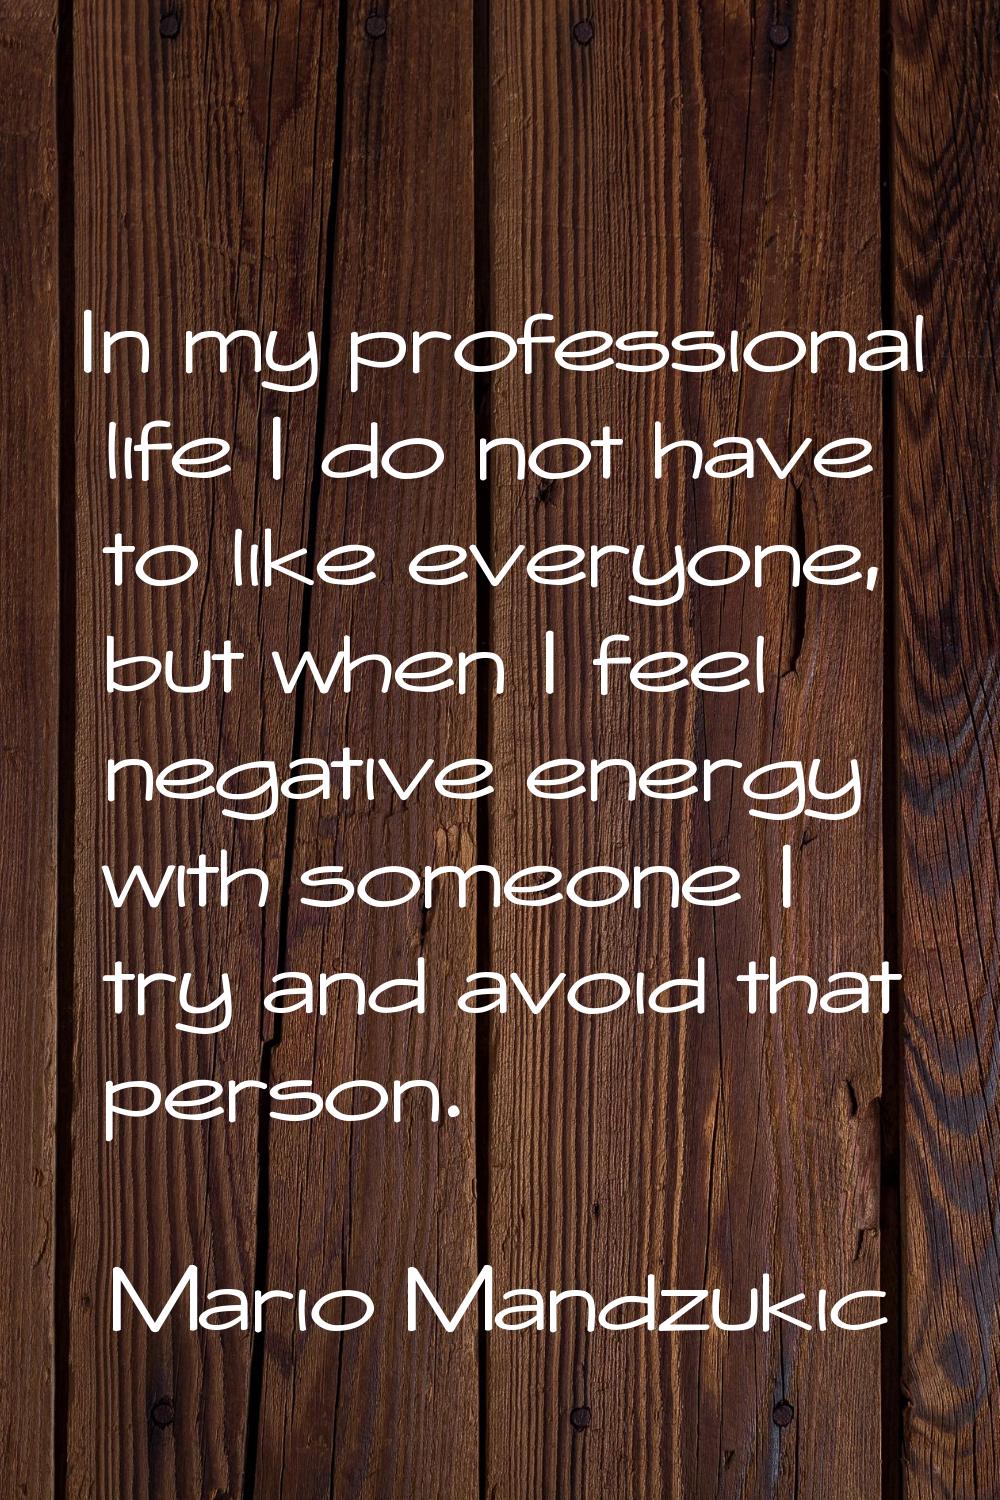 In my professional life I do not have to like everyone, but when I feel negative energy with someon